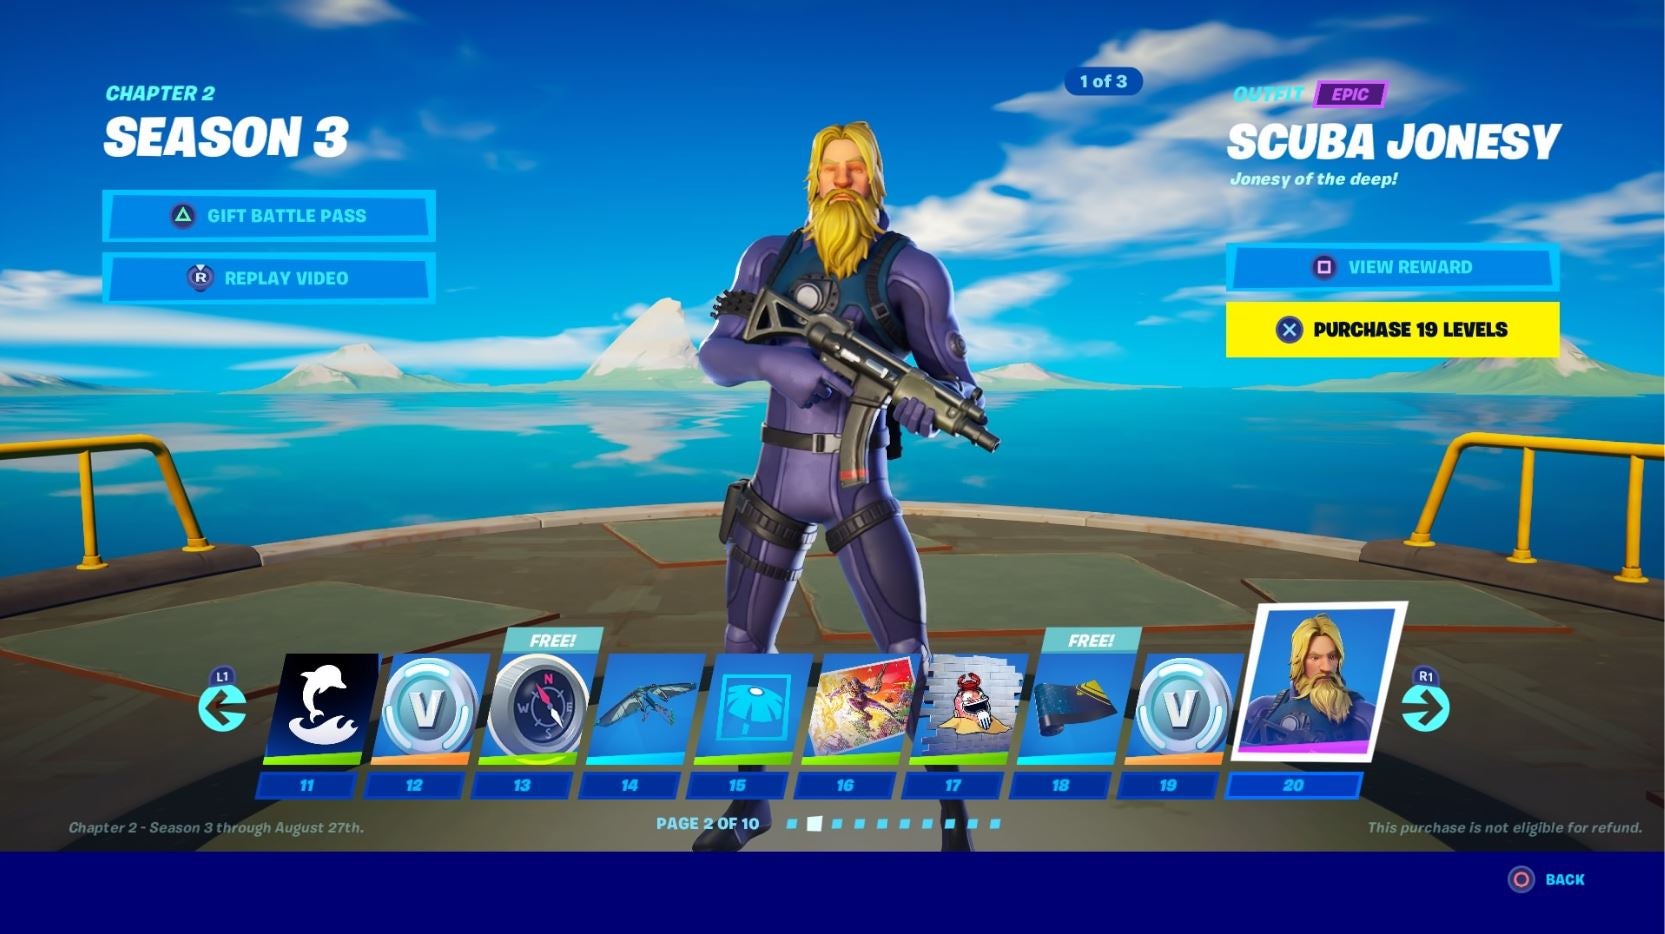 10 best anime skins in Fortnite: Anime outfits ranked - Charlie INTEL